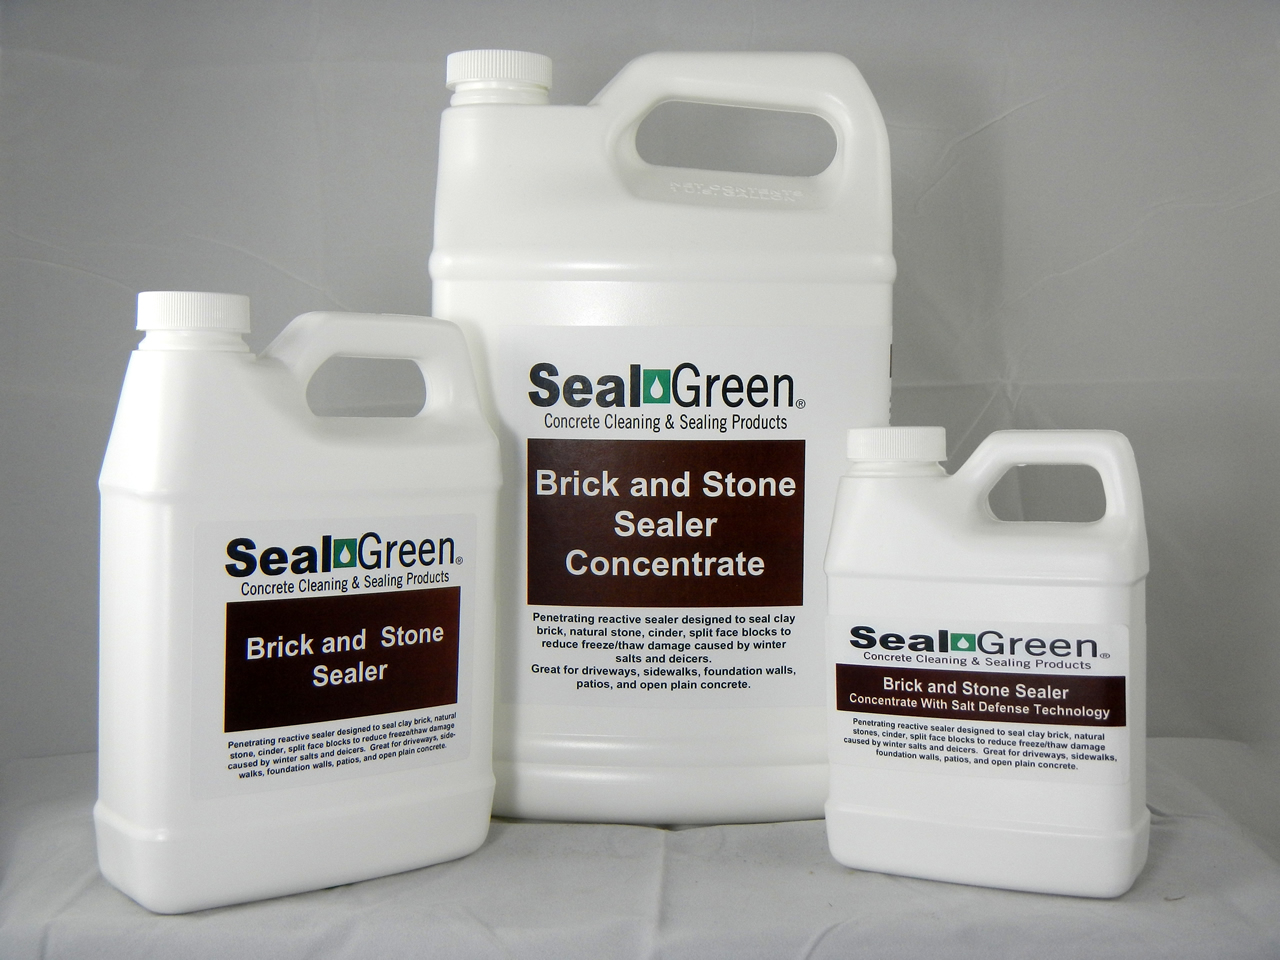 What is the permeability of the SealGreen Brick and Stone Penetrating Sealer?